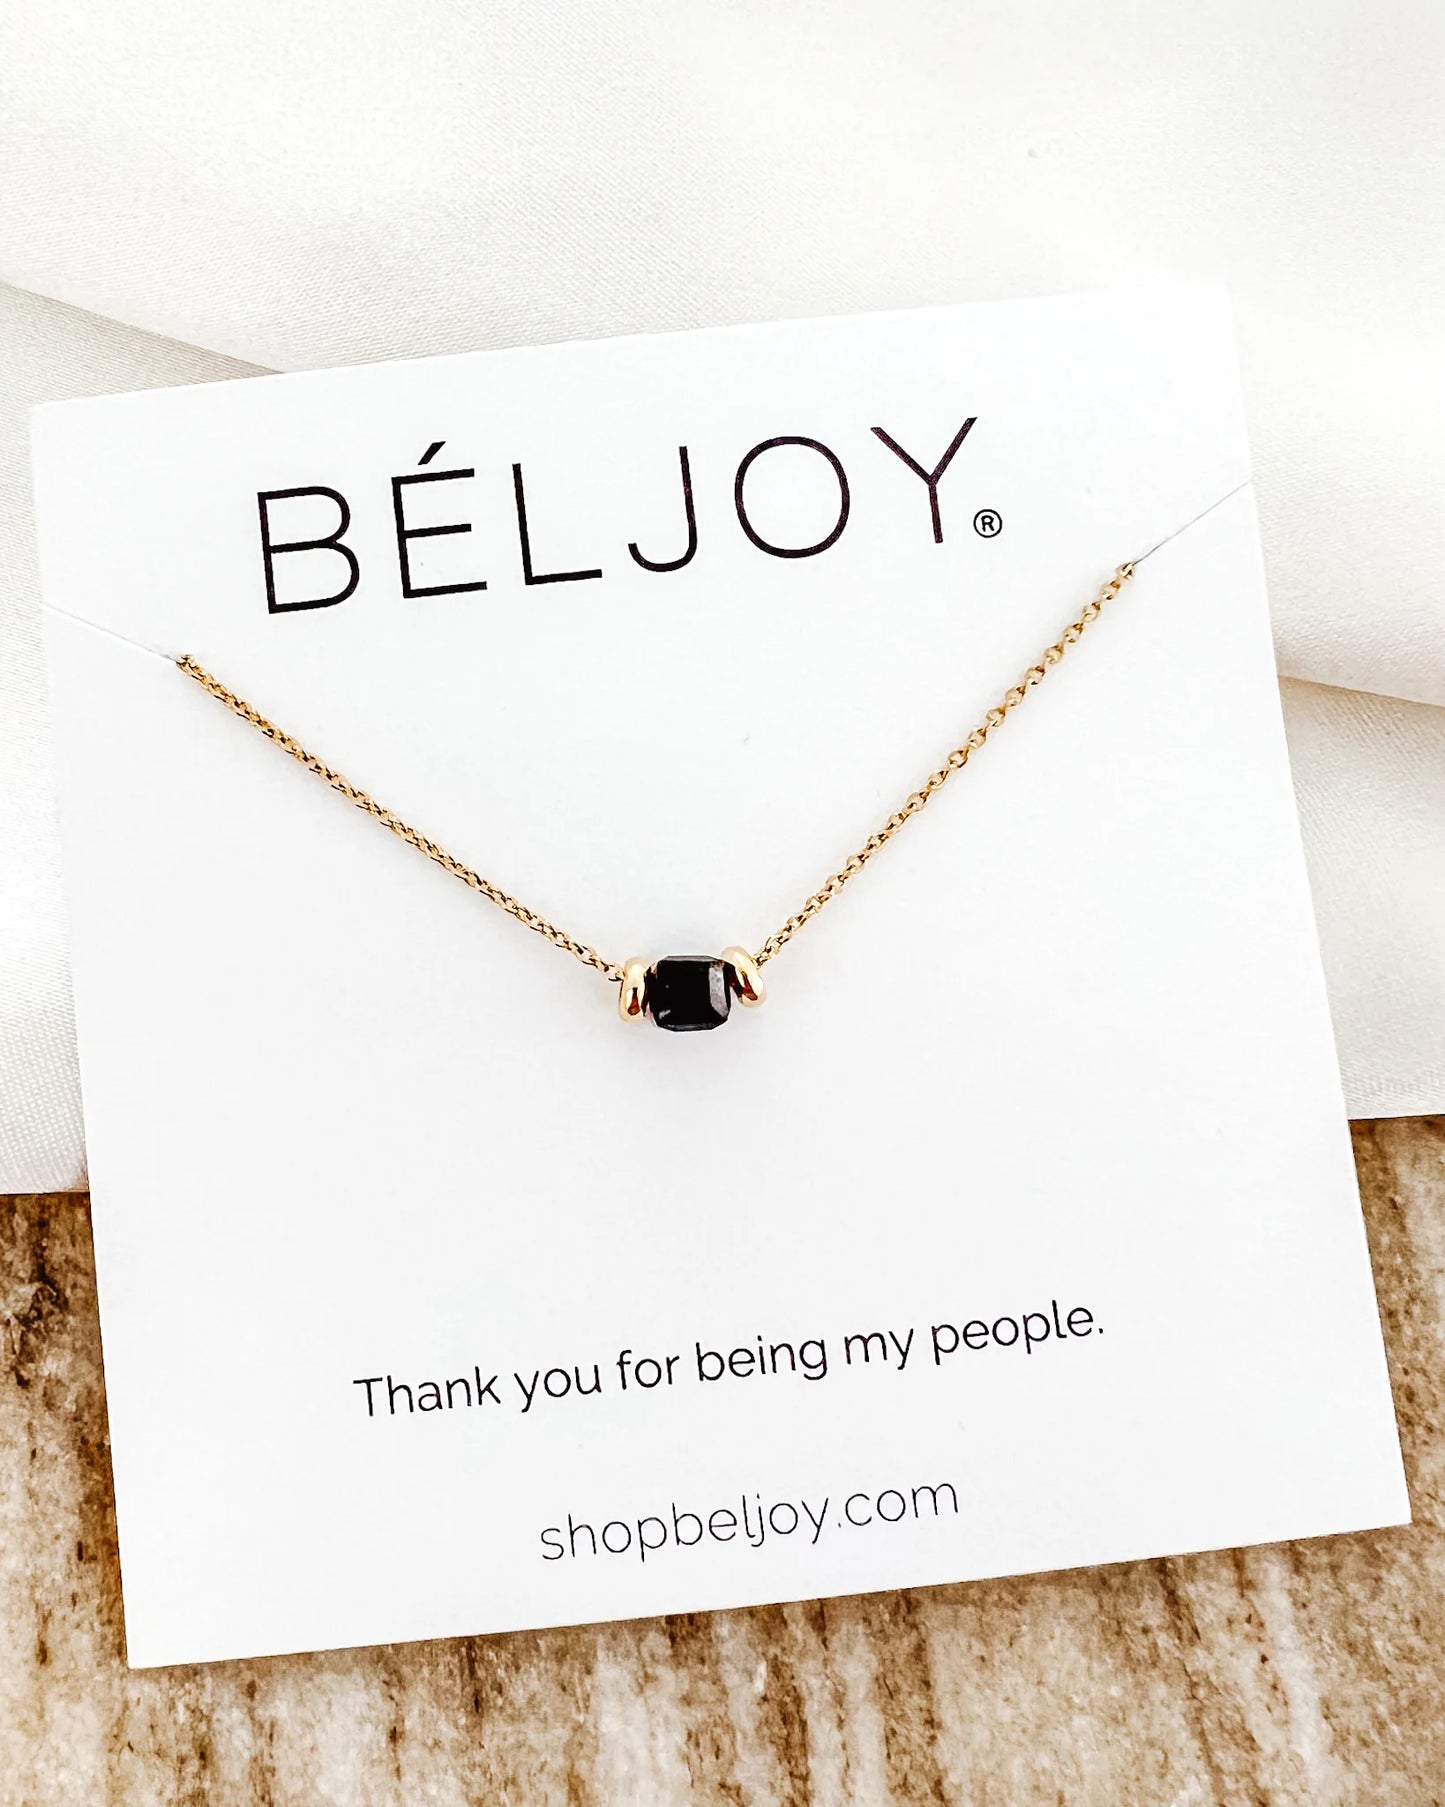 Beljoy: Gift Necklace - Thank You